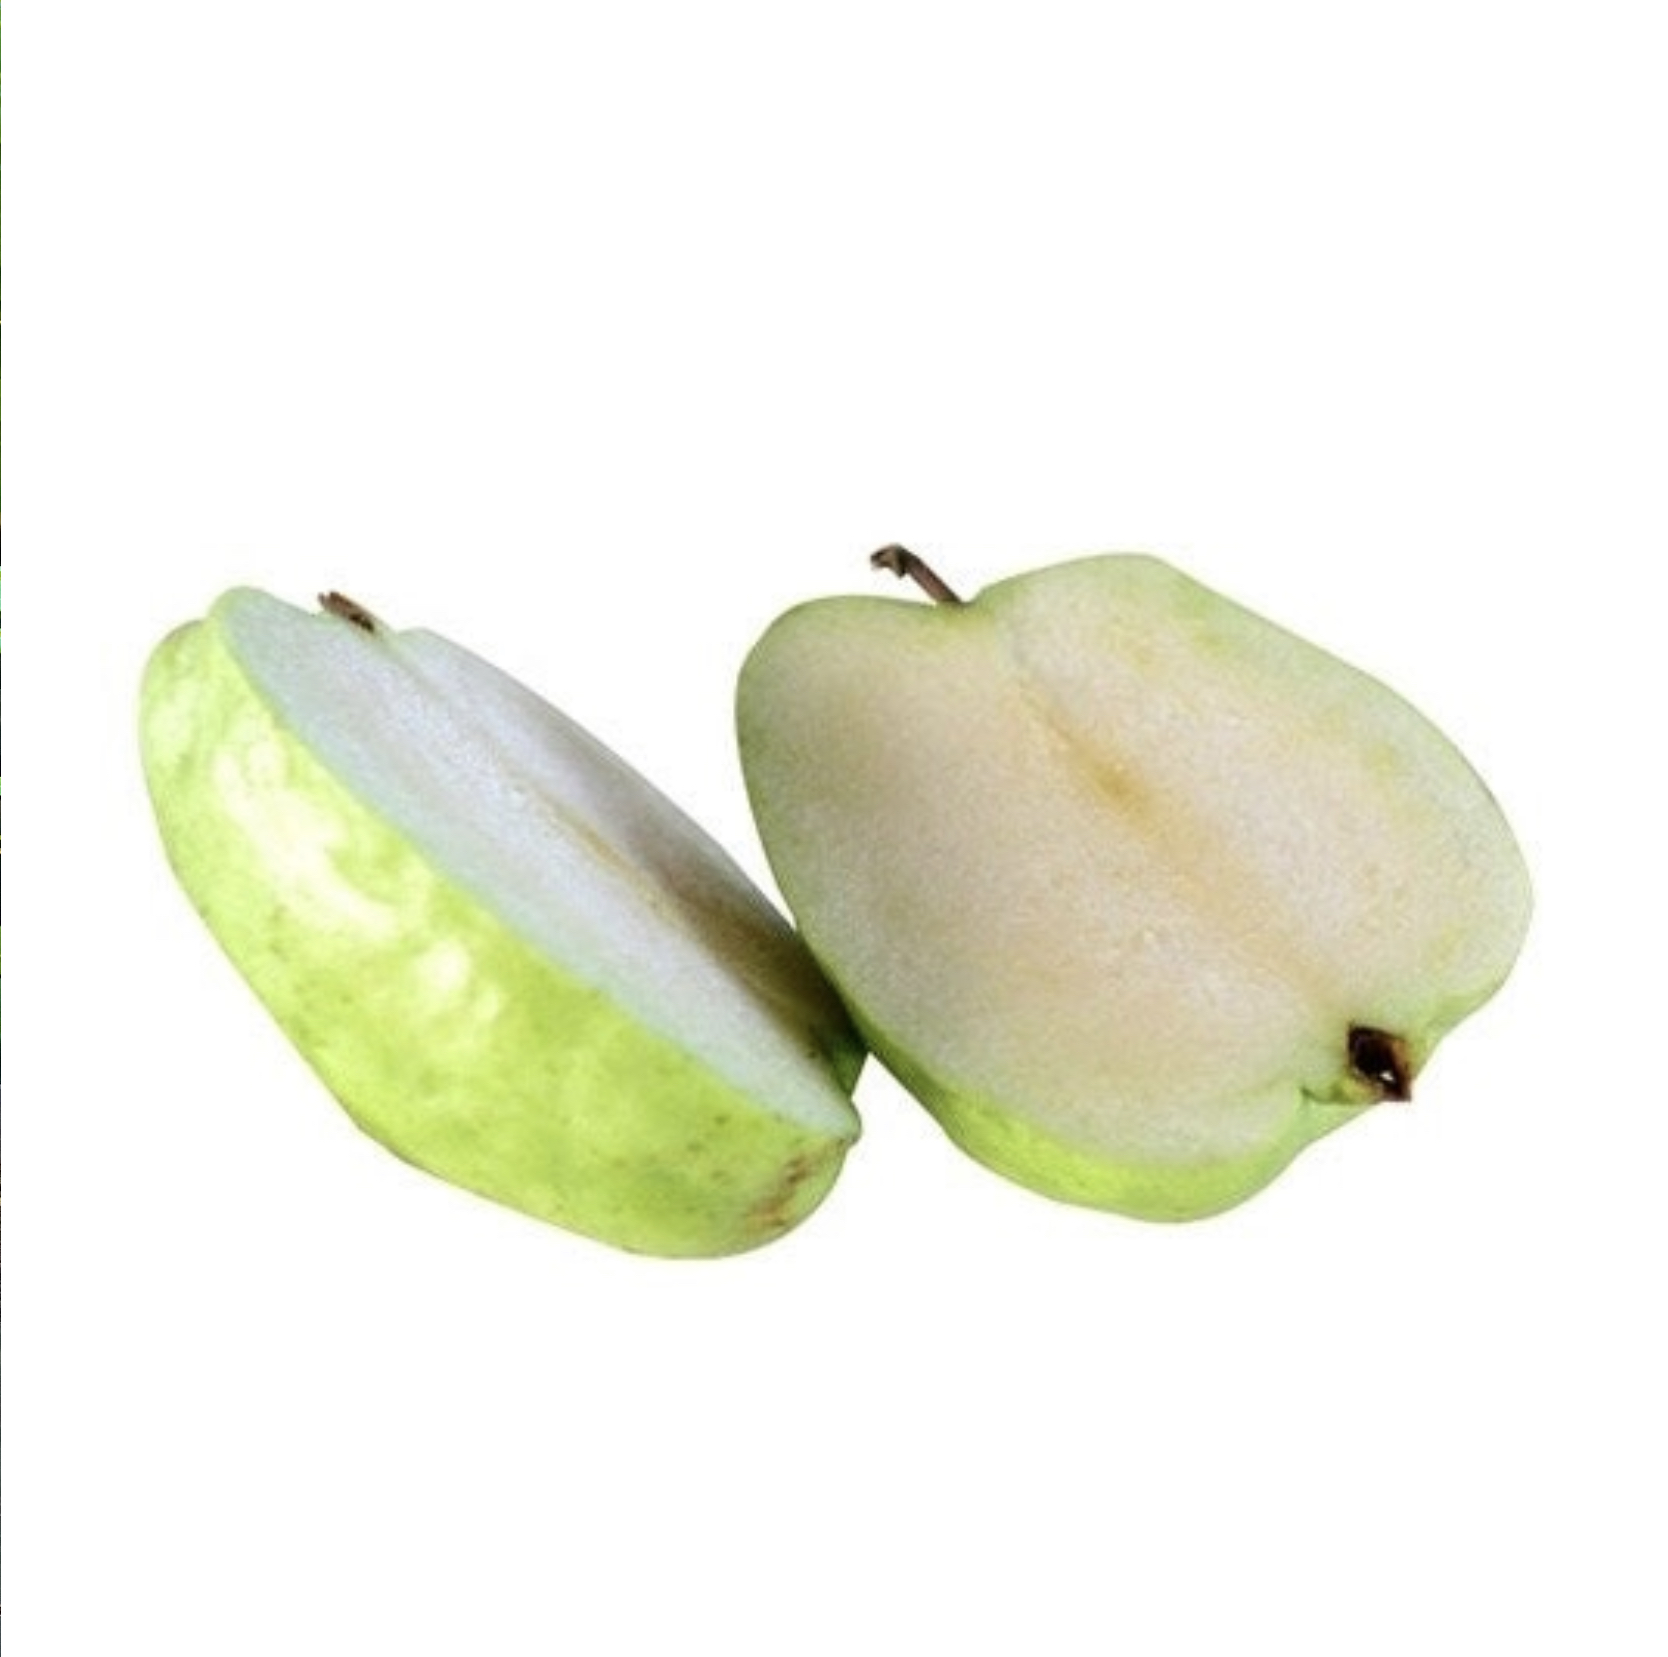 Indonesian seedless guava